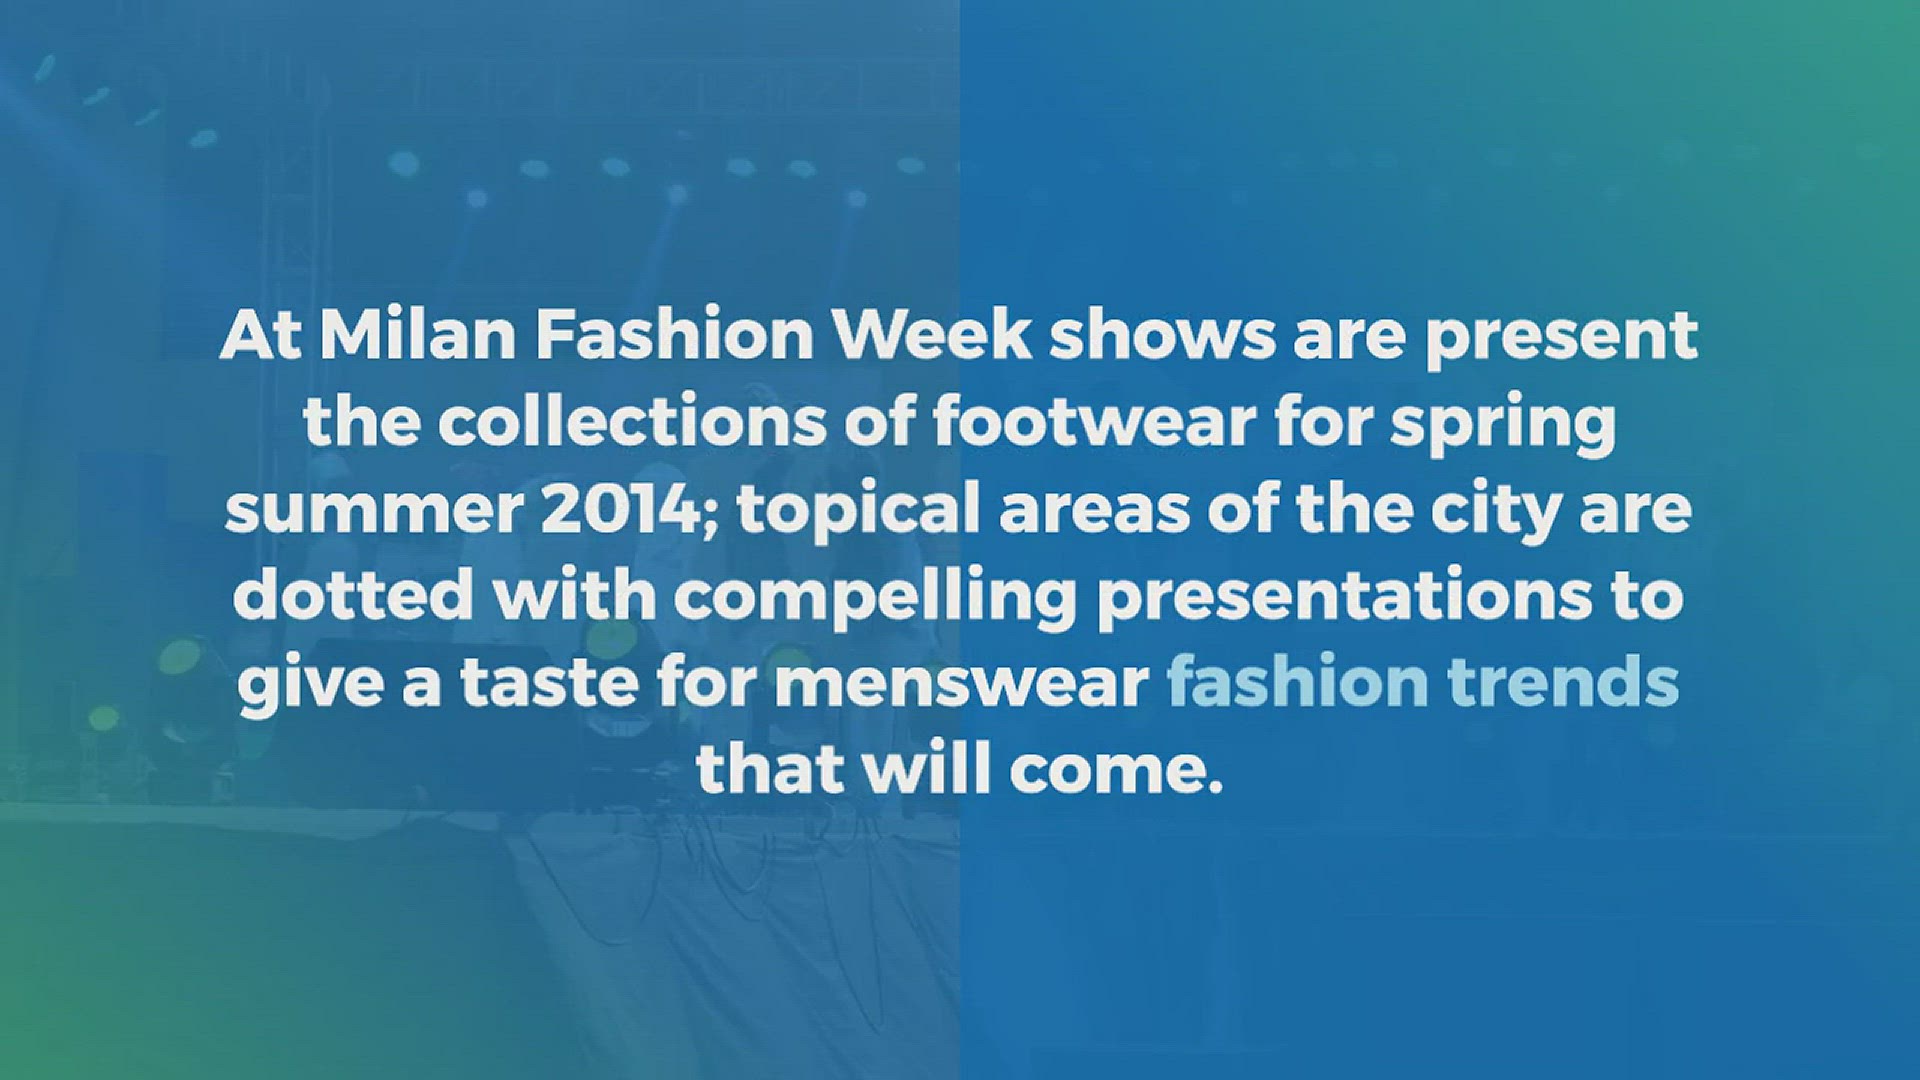 The 2021 Men's Fashion Week Schedule Is Disrupted by the Pandemic